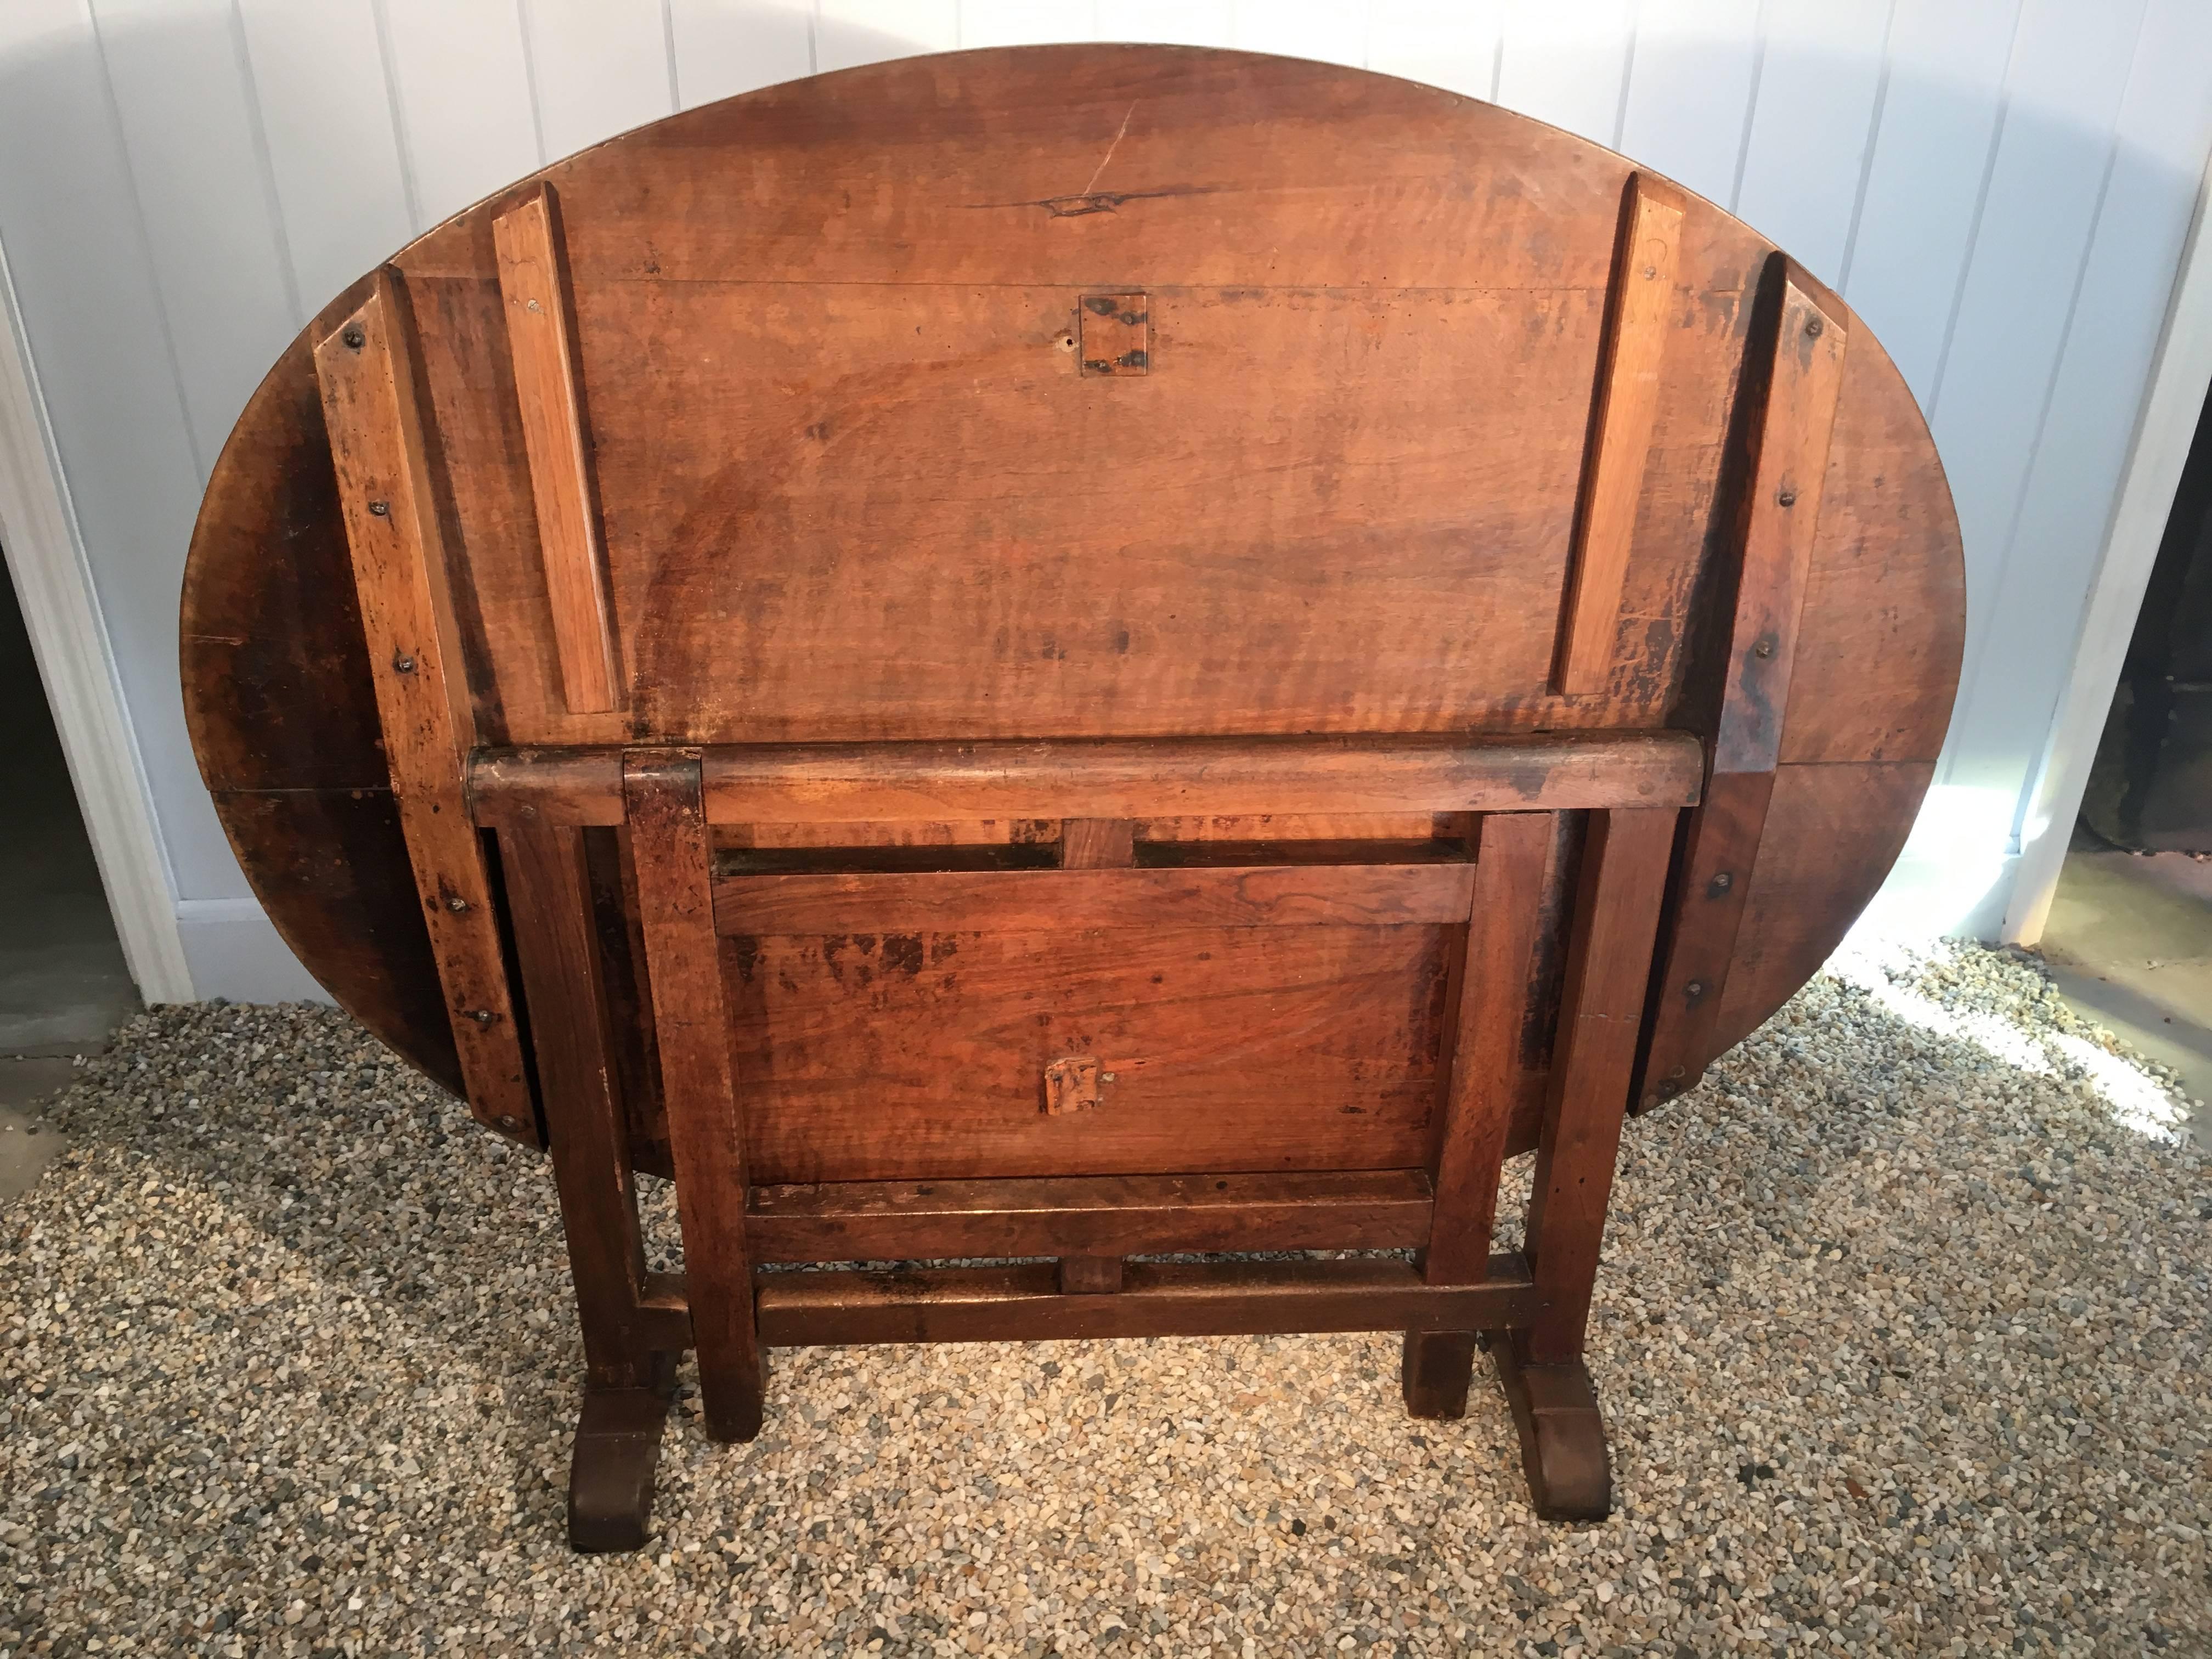 We love this walnut-topped vendange (wine-tasting) table for it's lovely waxed glow, easy storage (the tabletop tilts up) and seating for four. In wonderful, antique condition, there is a very small area of old wormwood loss to the inside of one of